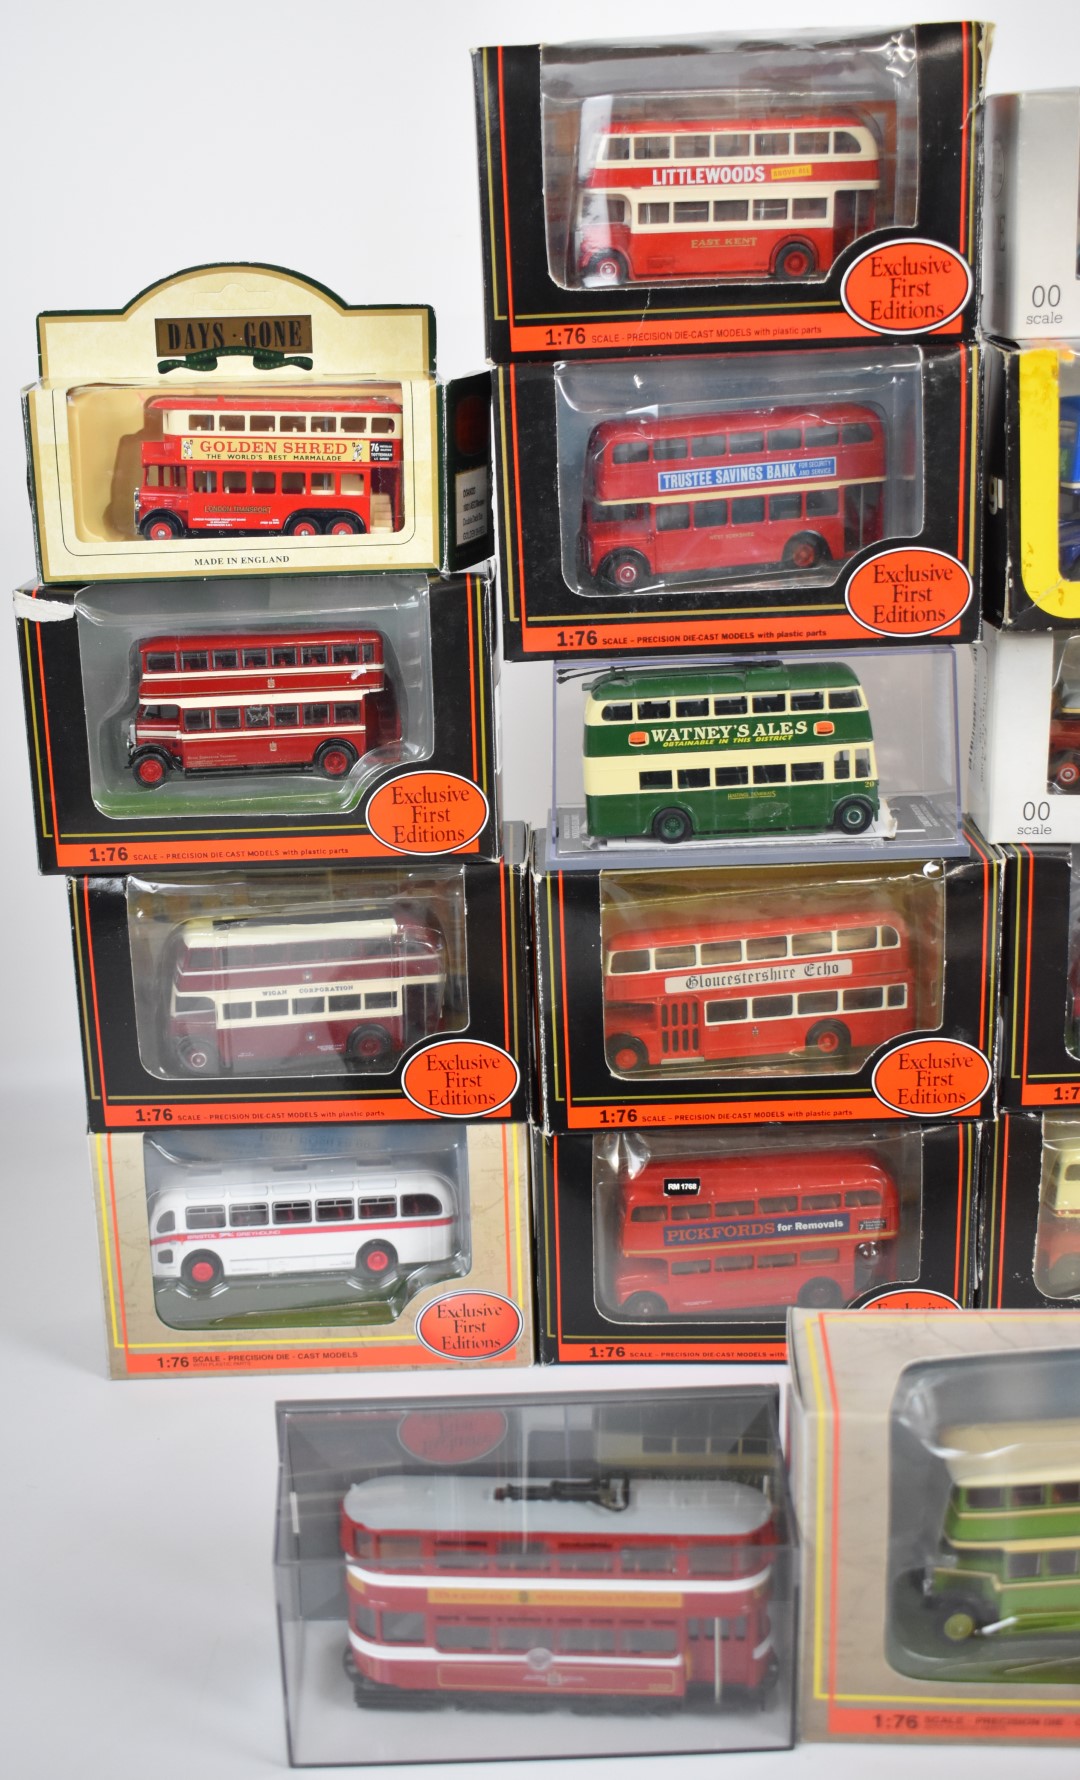 Twenty-four diecast model buses, manufacturers include Gilbow Exclusive First Editions (EFE), Corgi, - Image 4 of 5